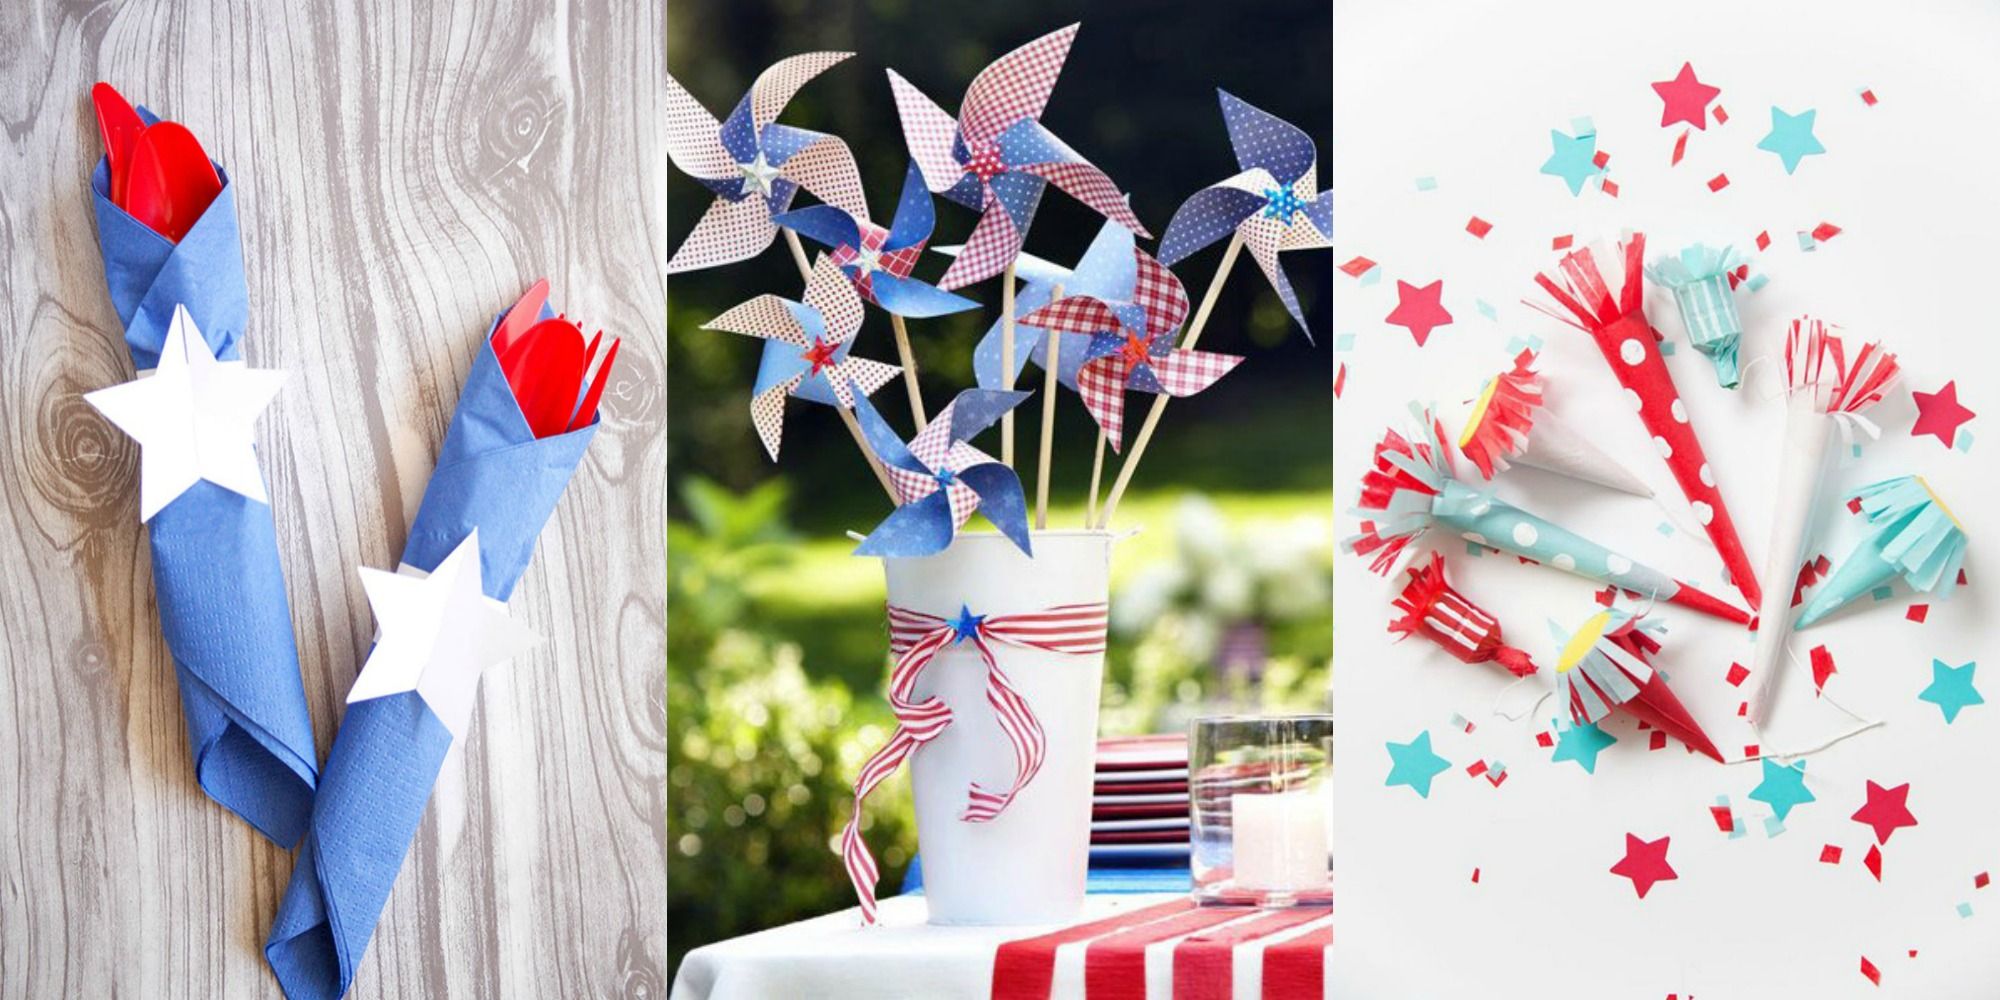 30+ Decorations for 4th of July 2018 - Patriotic Fourth of July ...